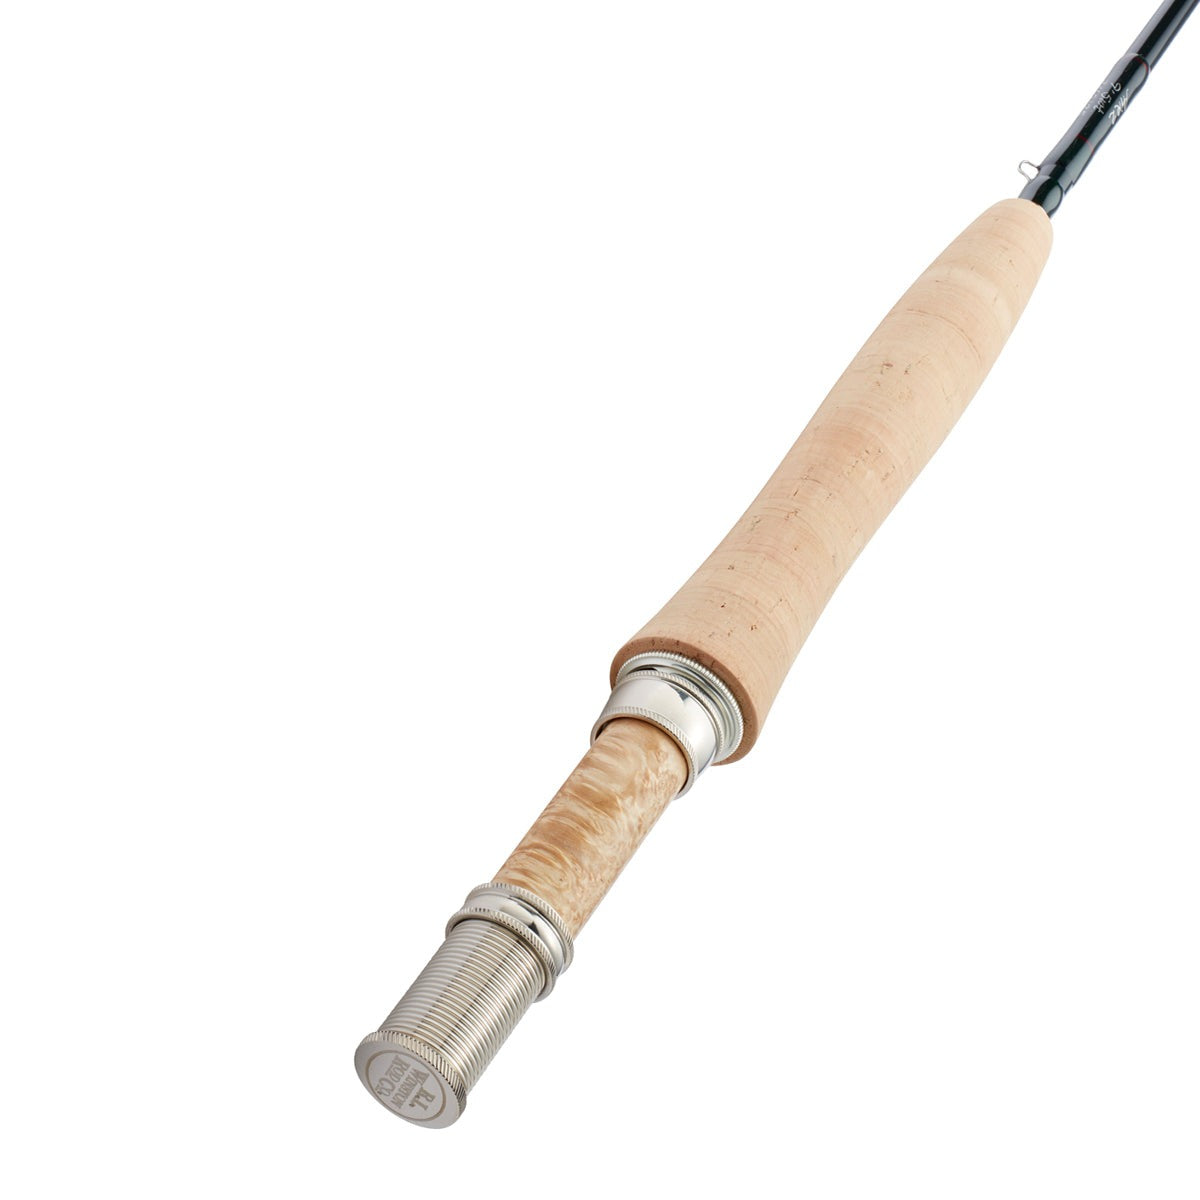 Fly Rods from The River's Edge Fly Shop